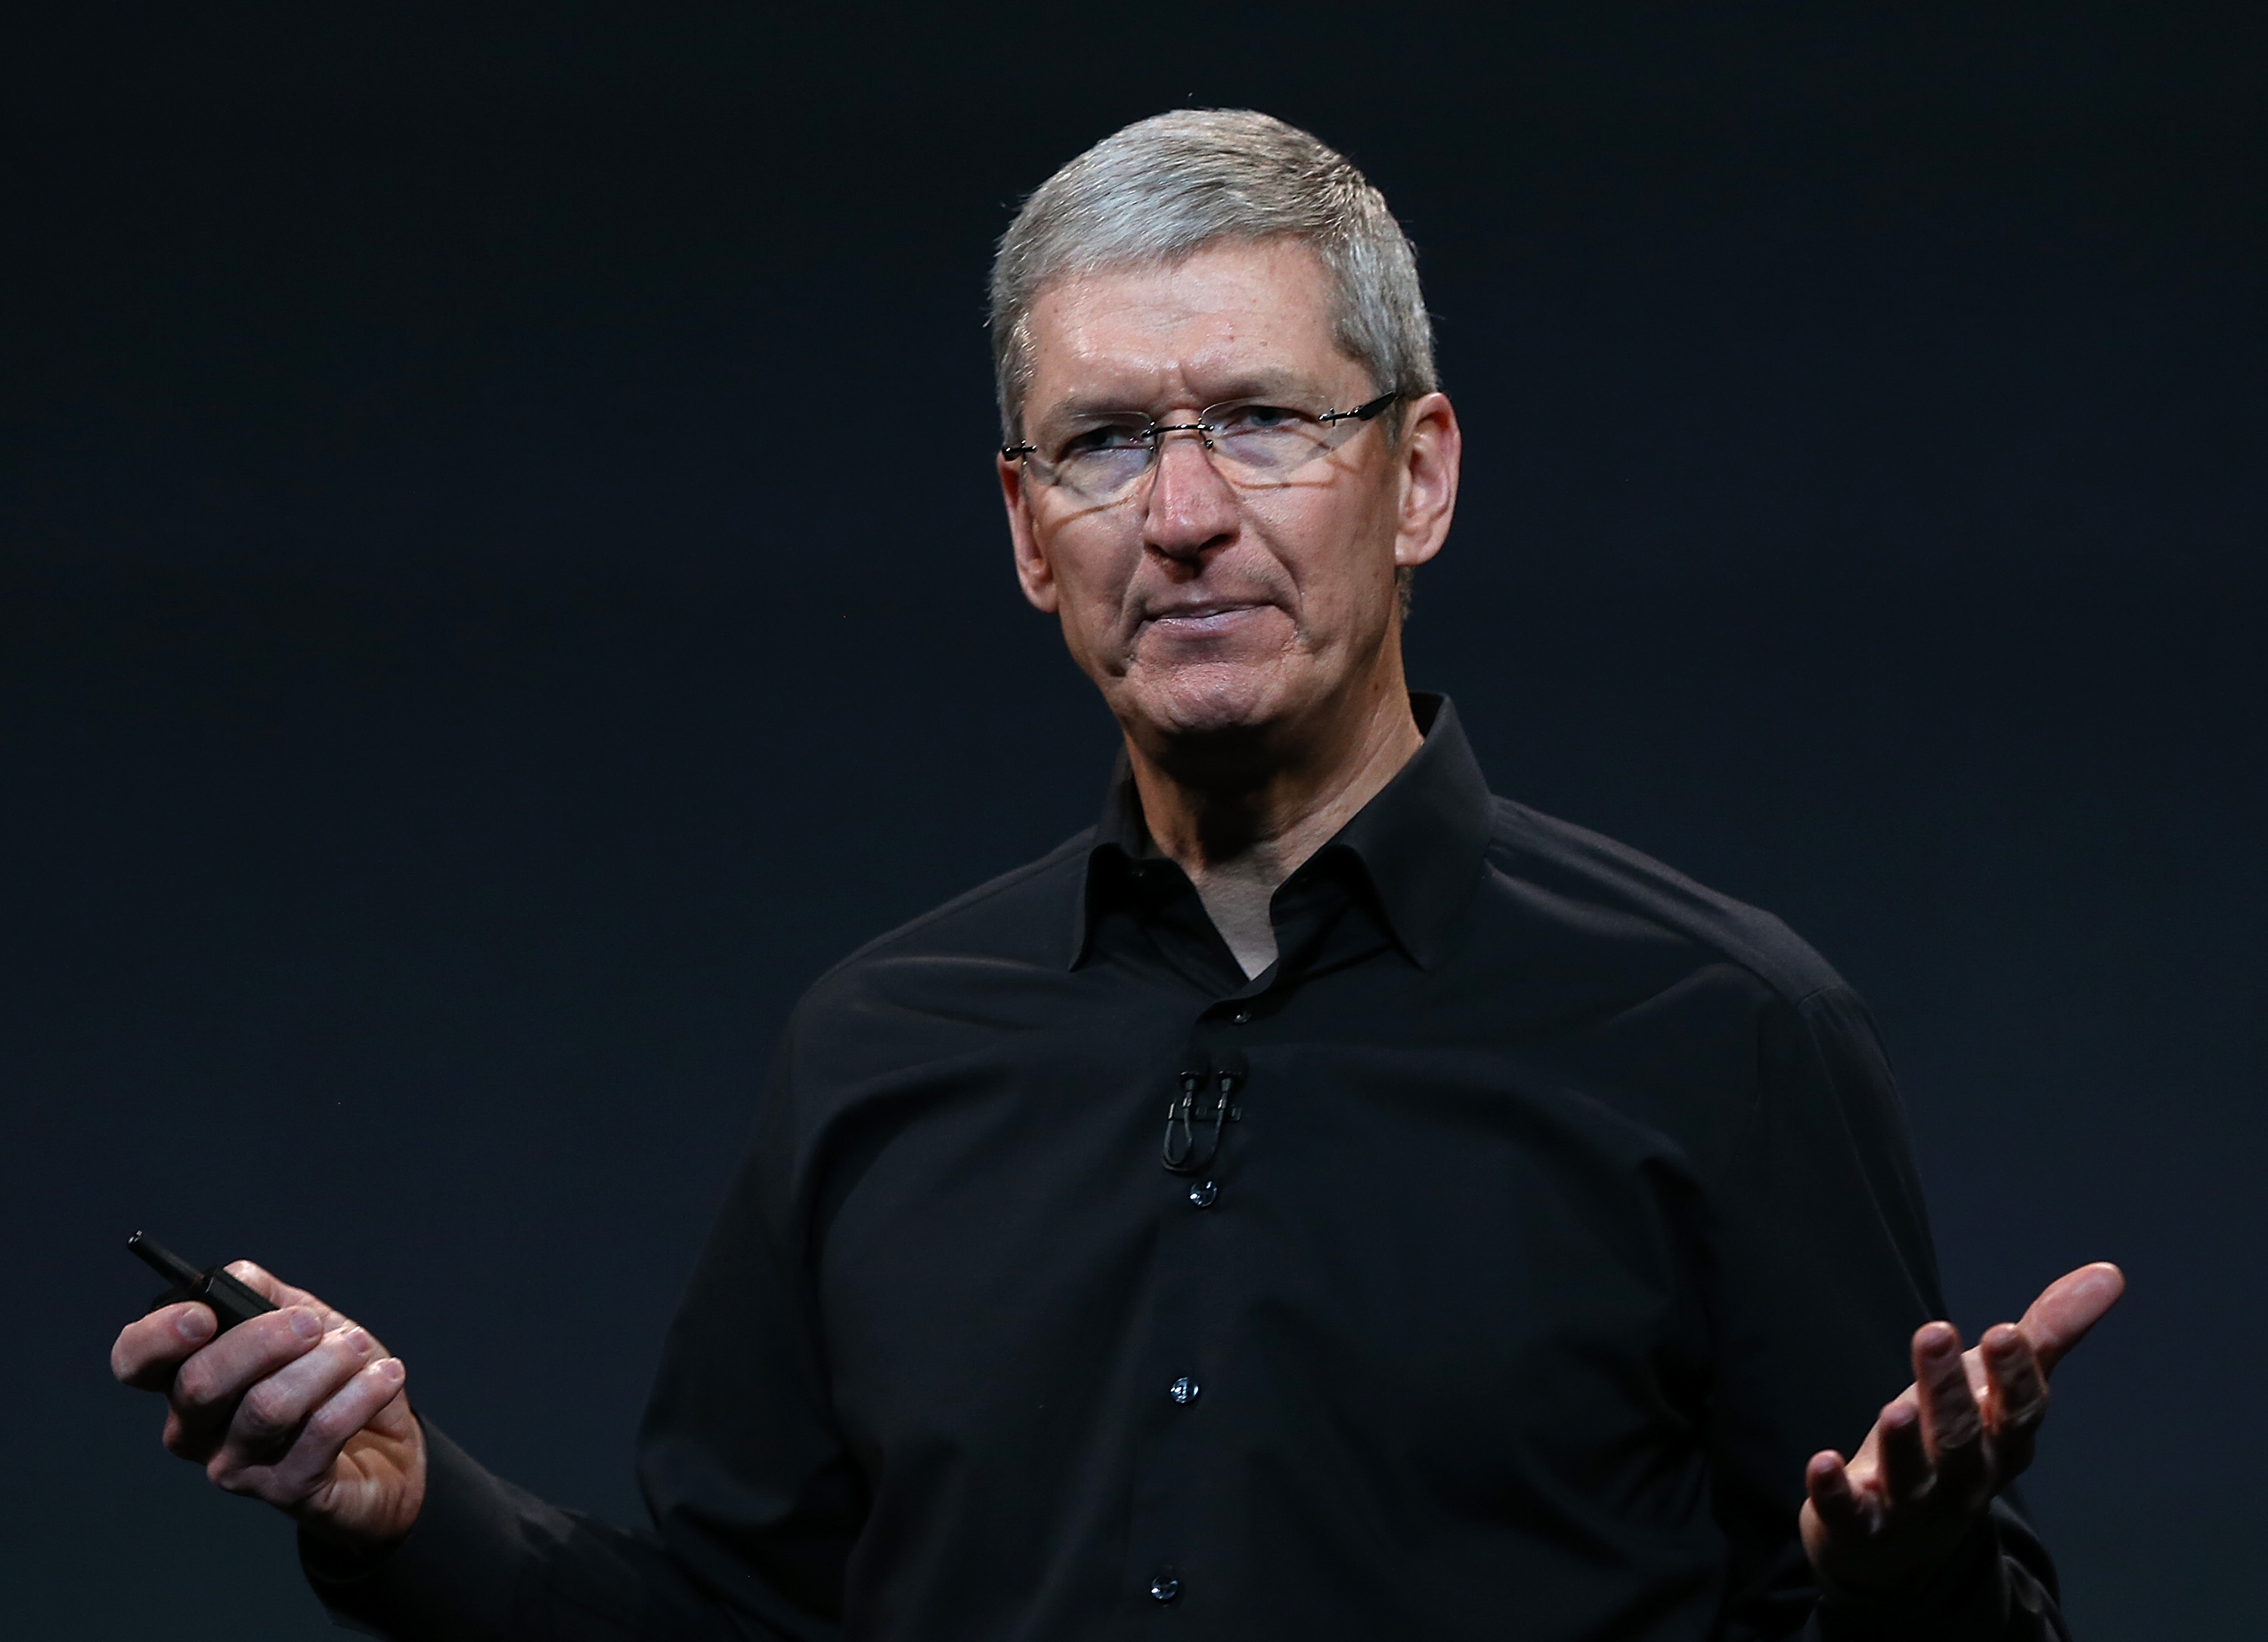 Apple CEO Tim Cook speaks during an Apple announcement at the Yerba Buena Center for the Arts on October 22, 2013 in San Francisco, California. (Justin Sullivan—Getty Images)